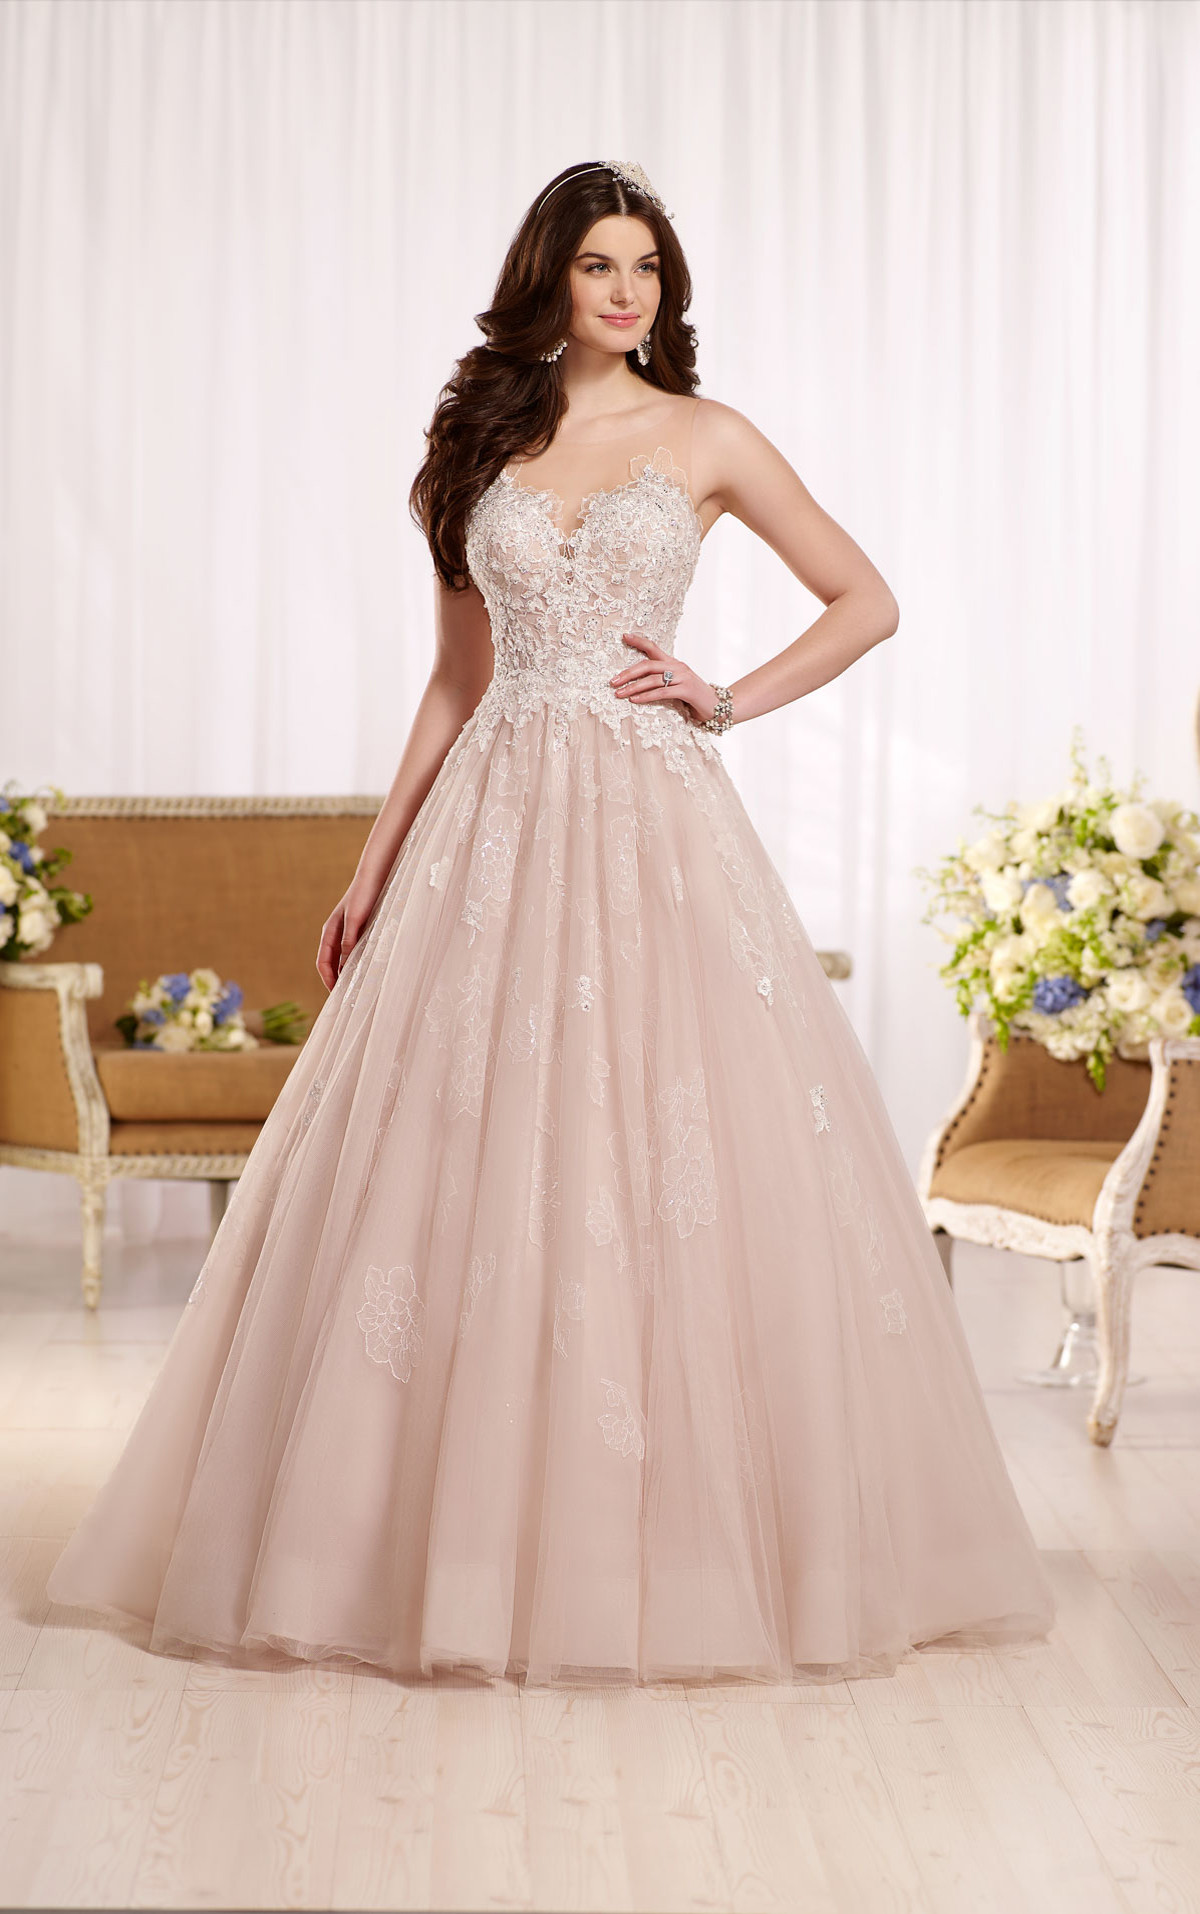 Wedding Gown Images
 Ball Gown Wedding Dress with Tulle Skirt